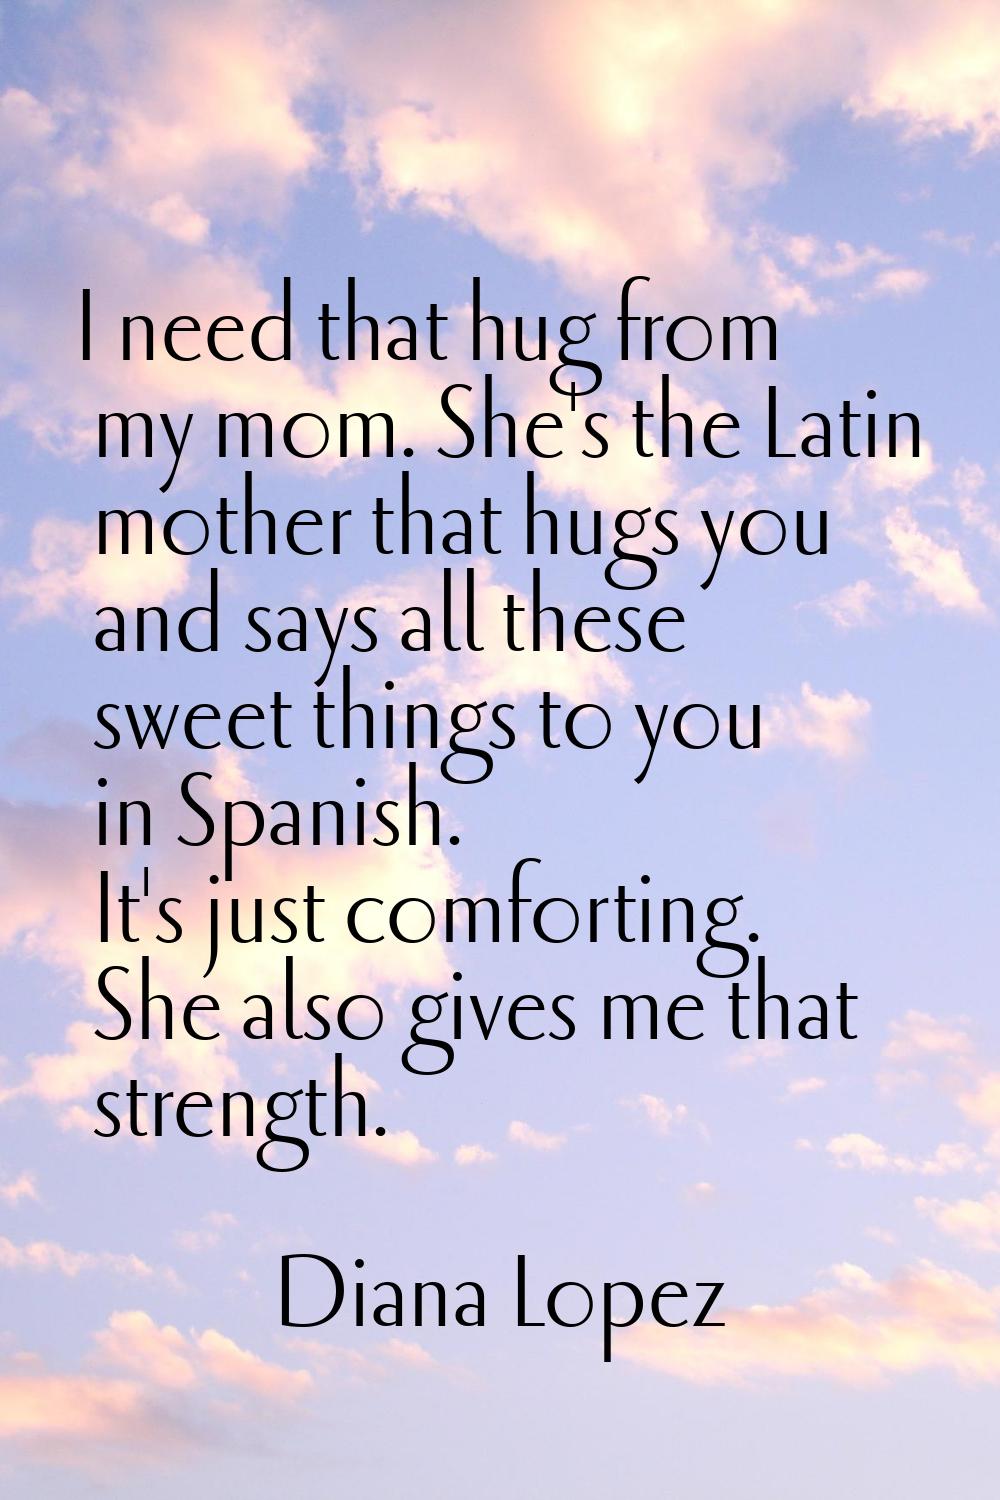 I need that hug from my mom. She's the Latin mother that hugs you and says all these sweet things t